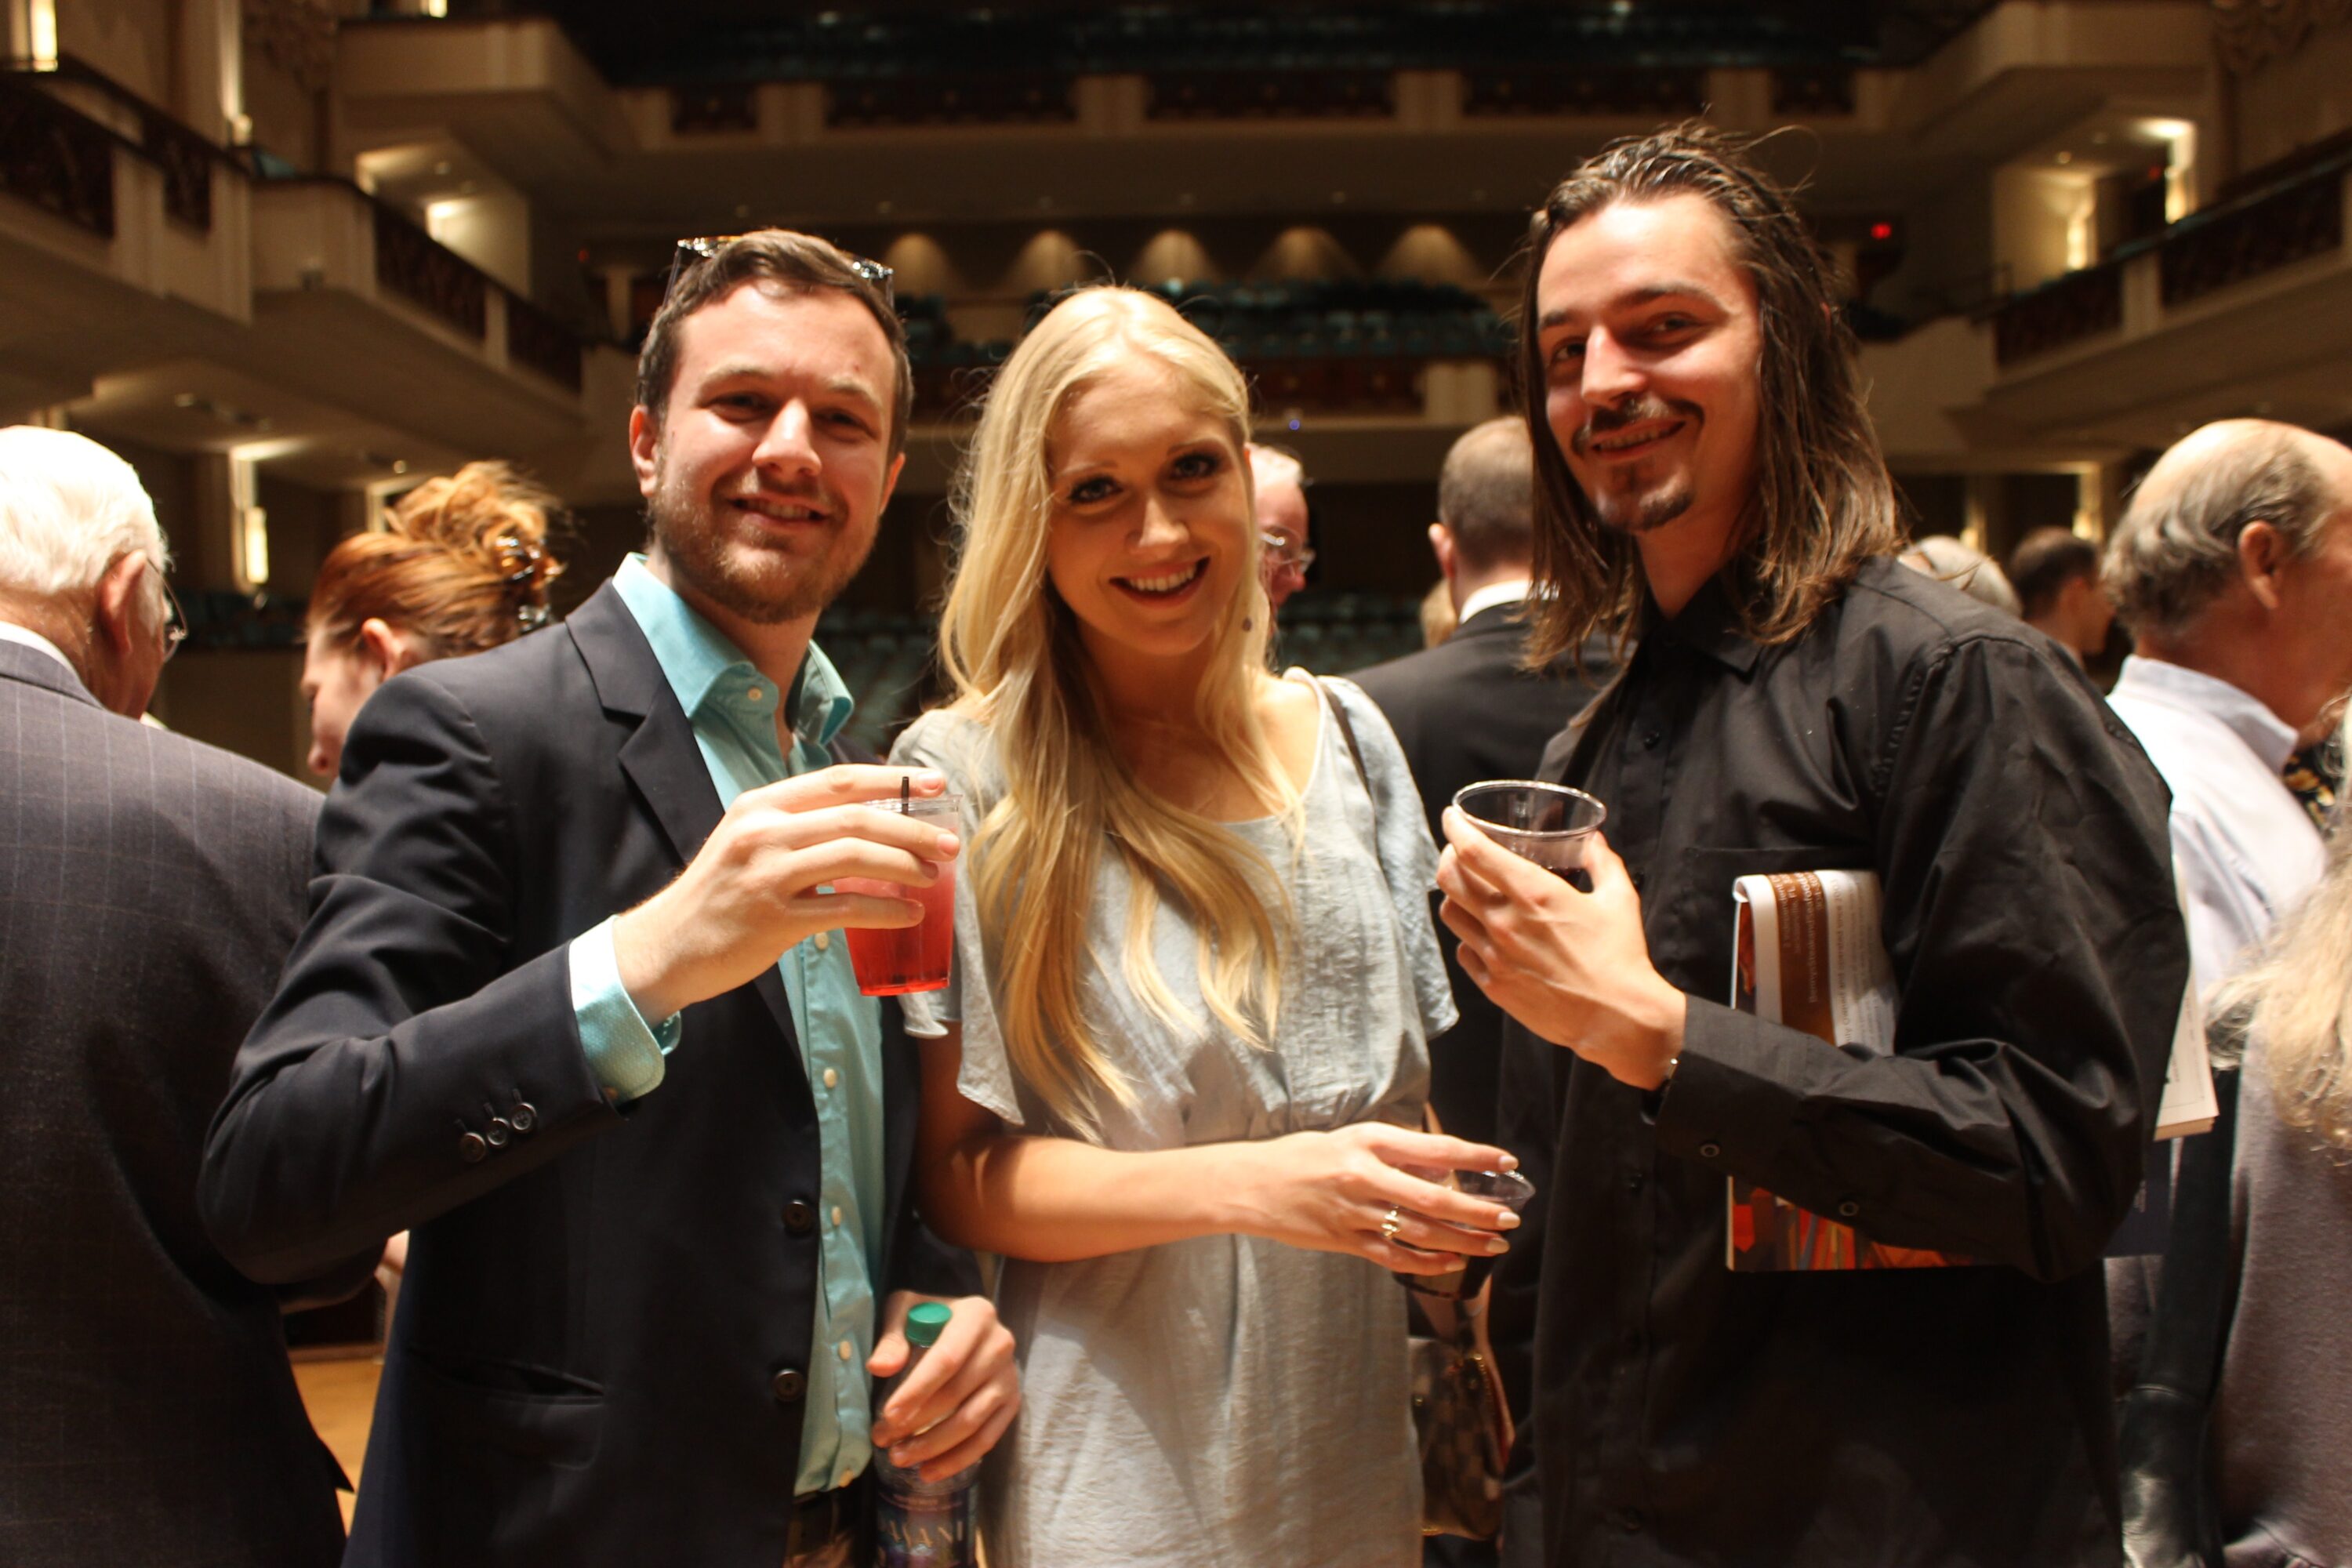 Concertgoers at a recent Jacksonville Symphony performance